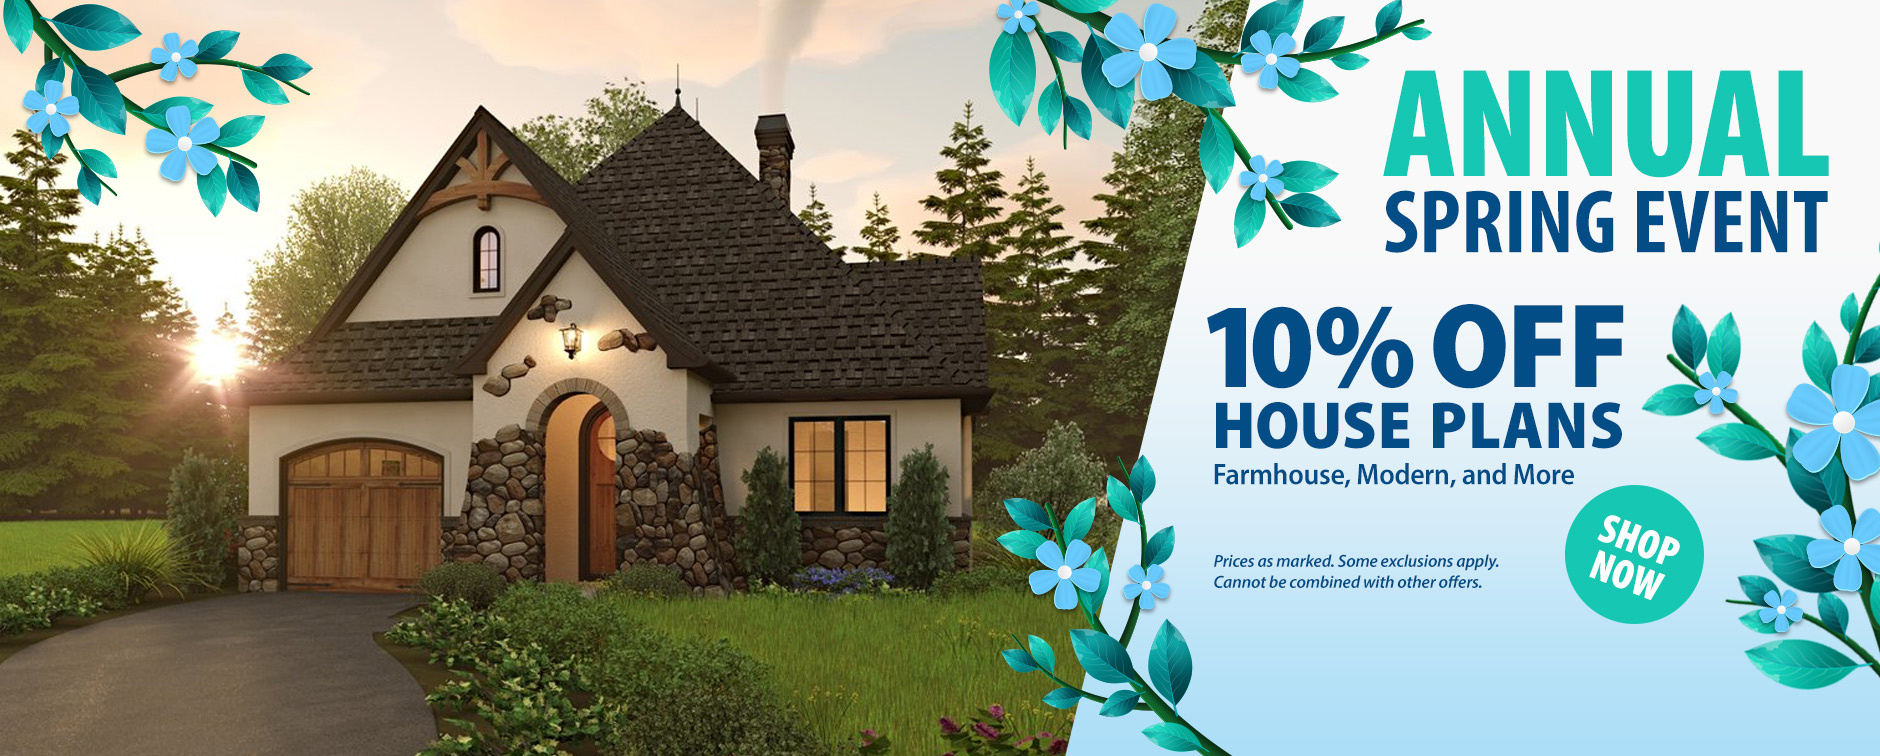 Save 10% on Home Plans - Modern, Farmhouse, Traditional, Ranch, and More